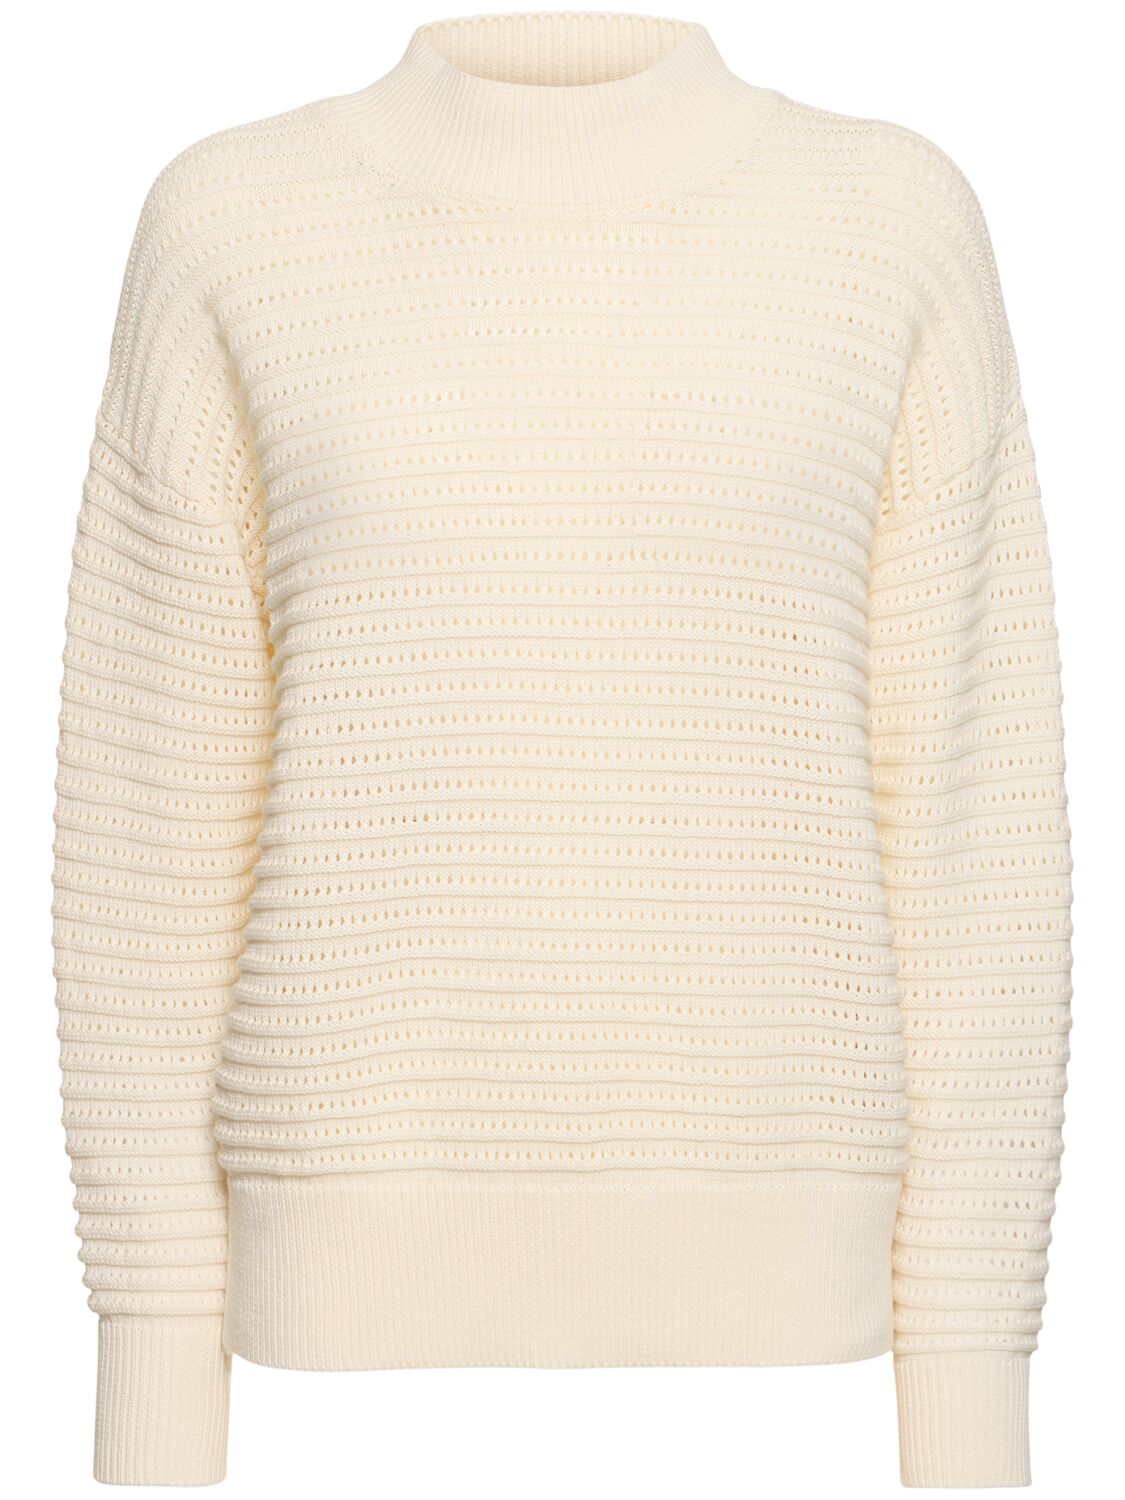 Varley Franco Knit Sweater In Neutral